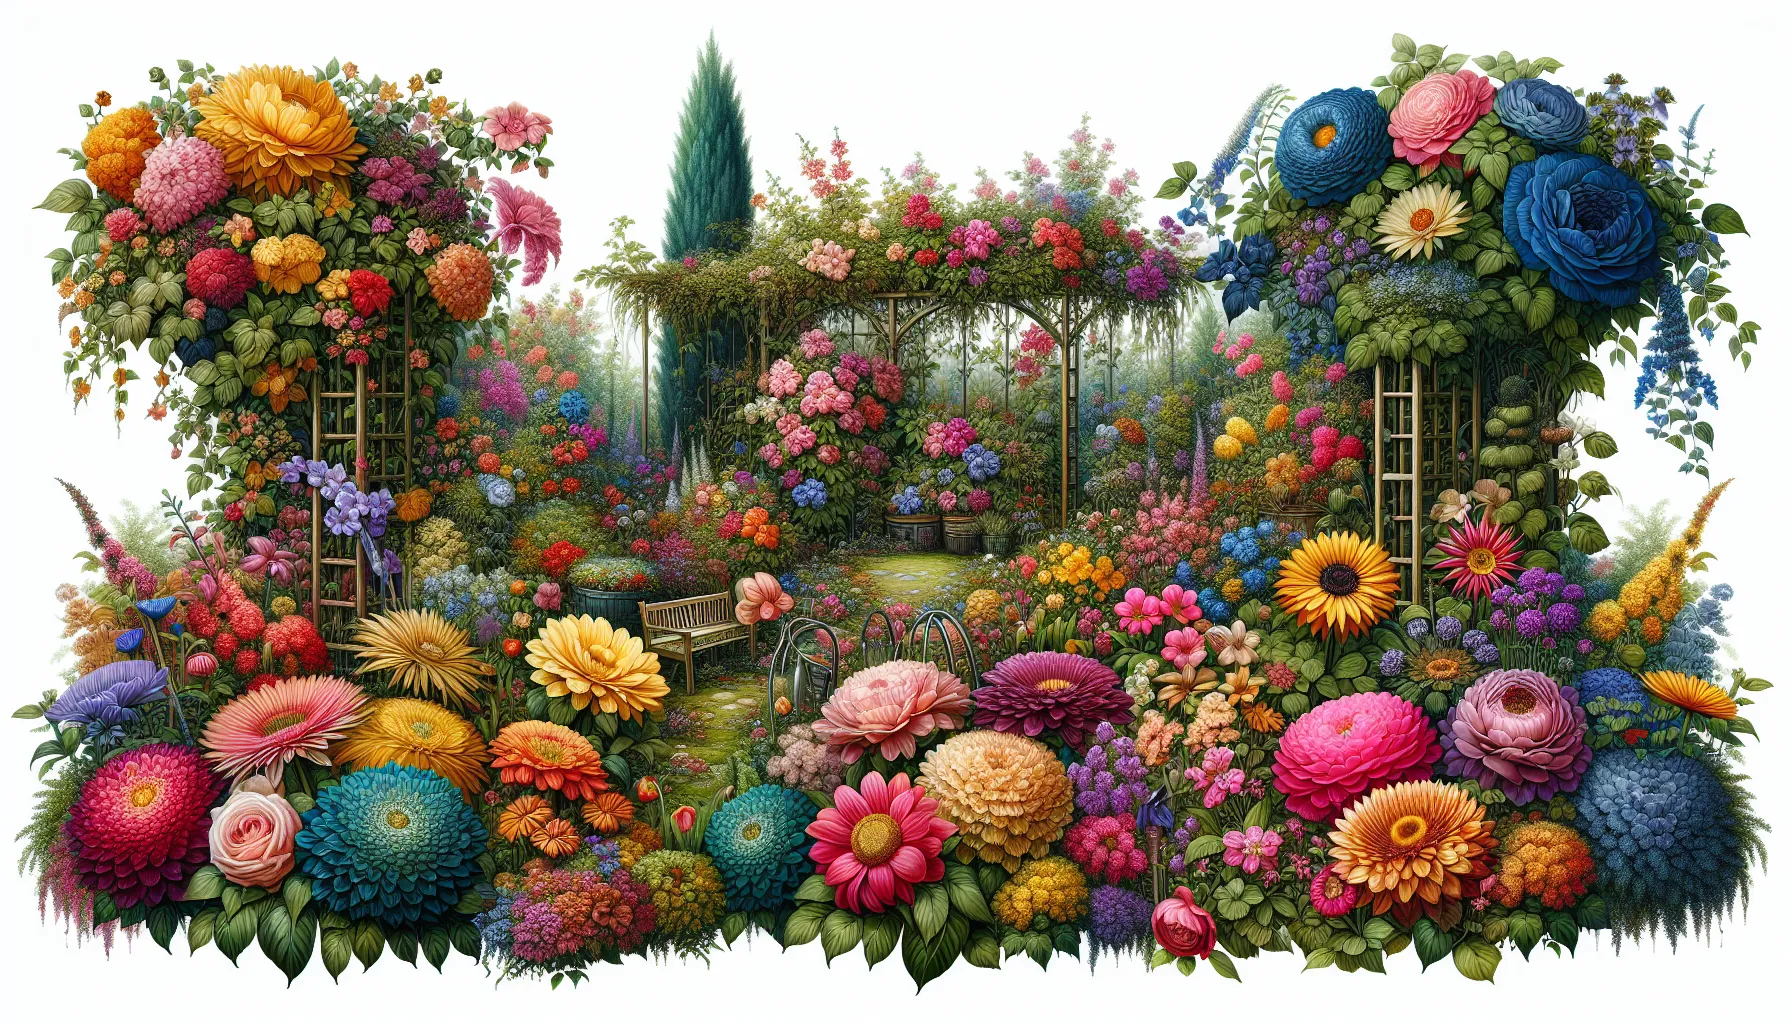 An elaborate garden scene densely packed with vibrant and colorful flowers of various species, surrounding a quaint garden path and pergola.